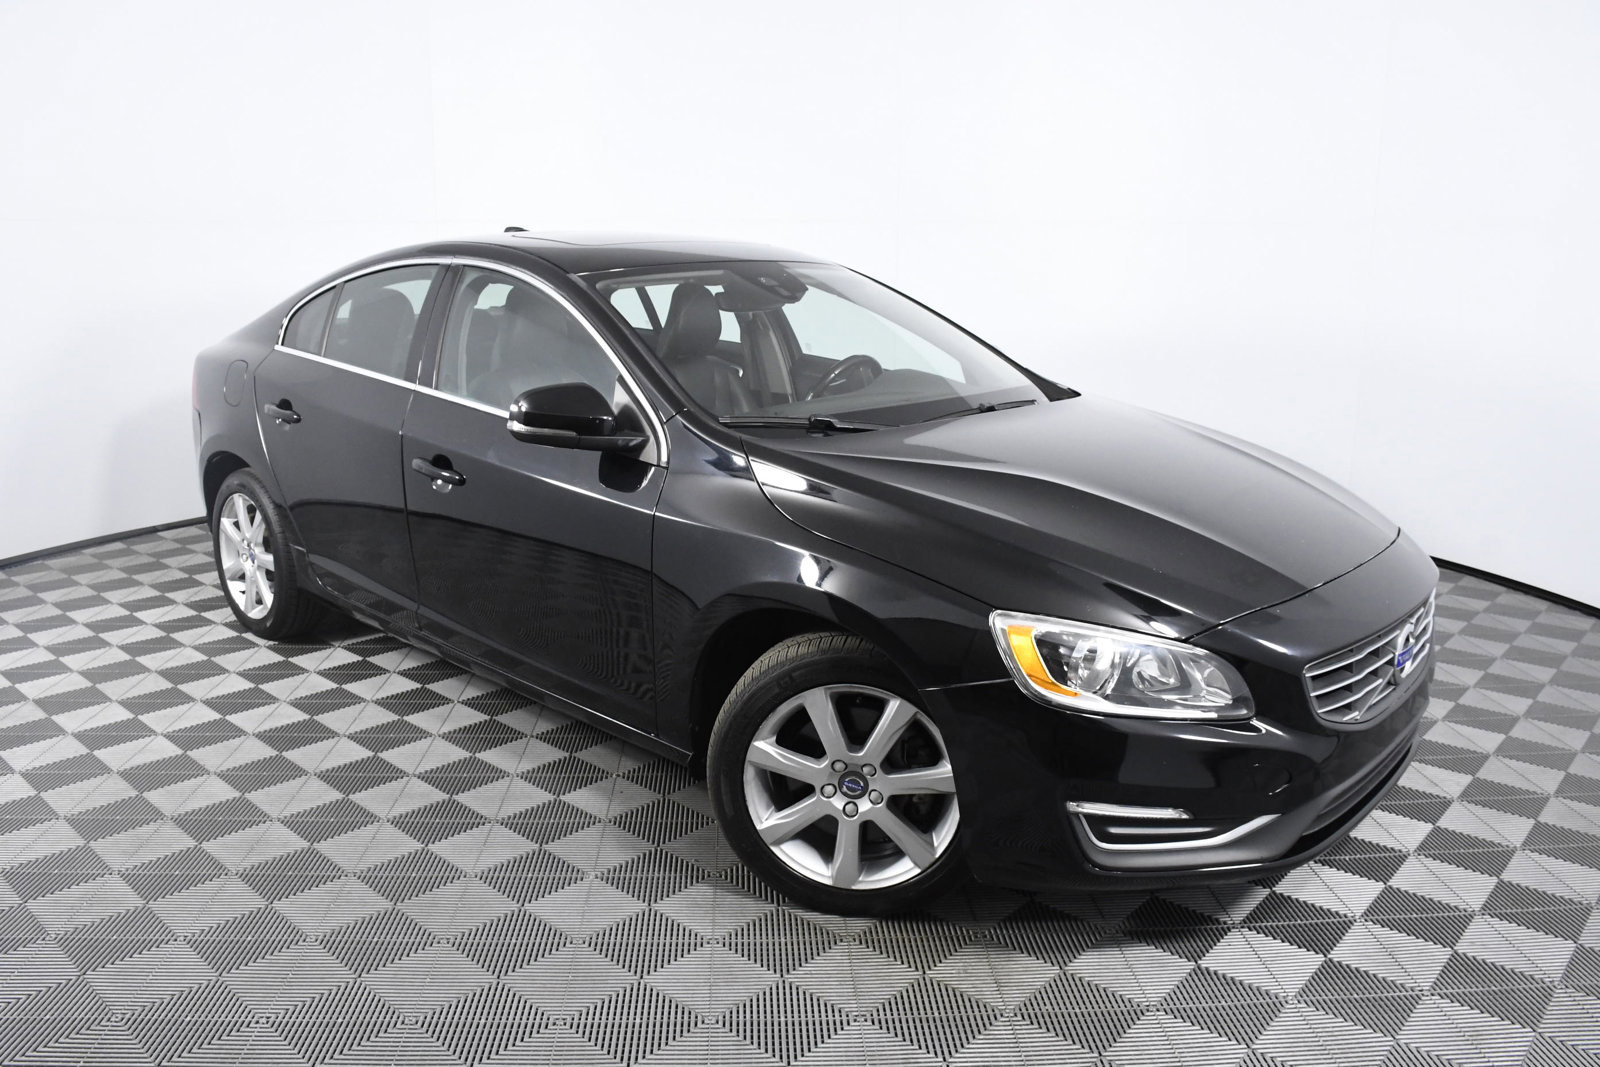 Pre-Owned 2016 Volvo S60 T5 Premier 4dr Car in Palmetto Bay #2390403 |  HGreg Nissan Kendall